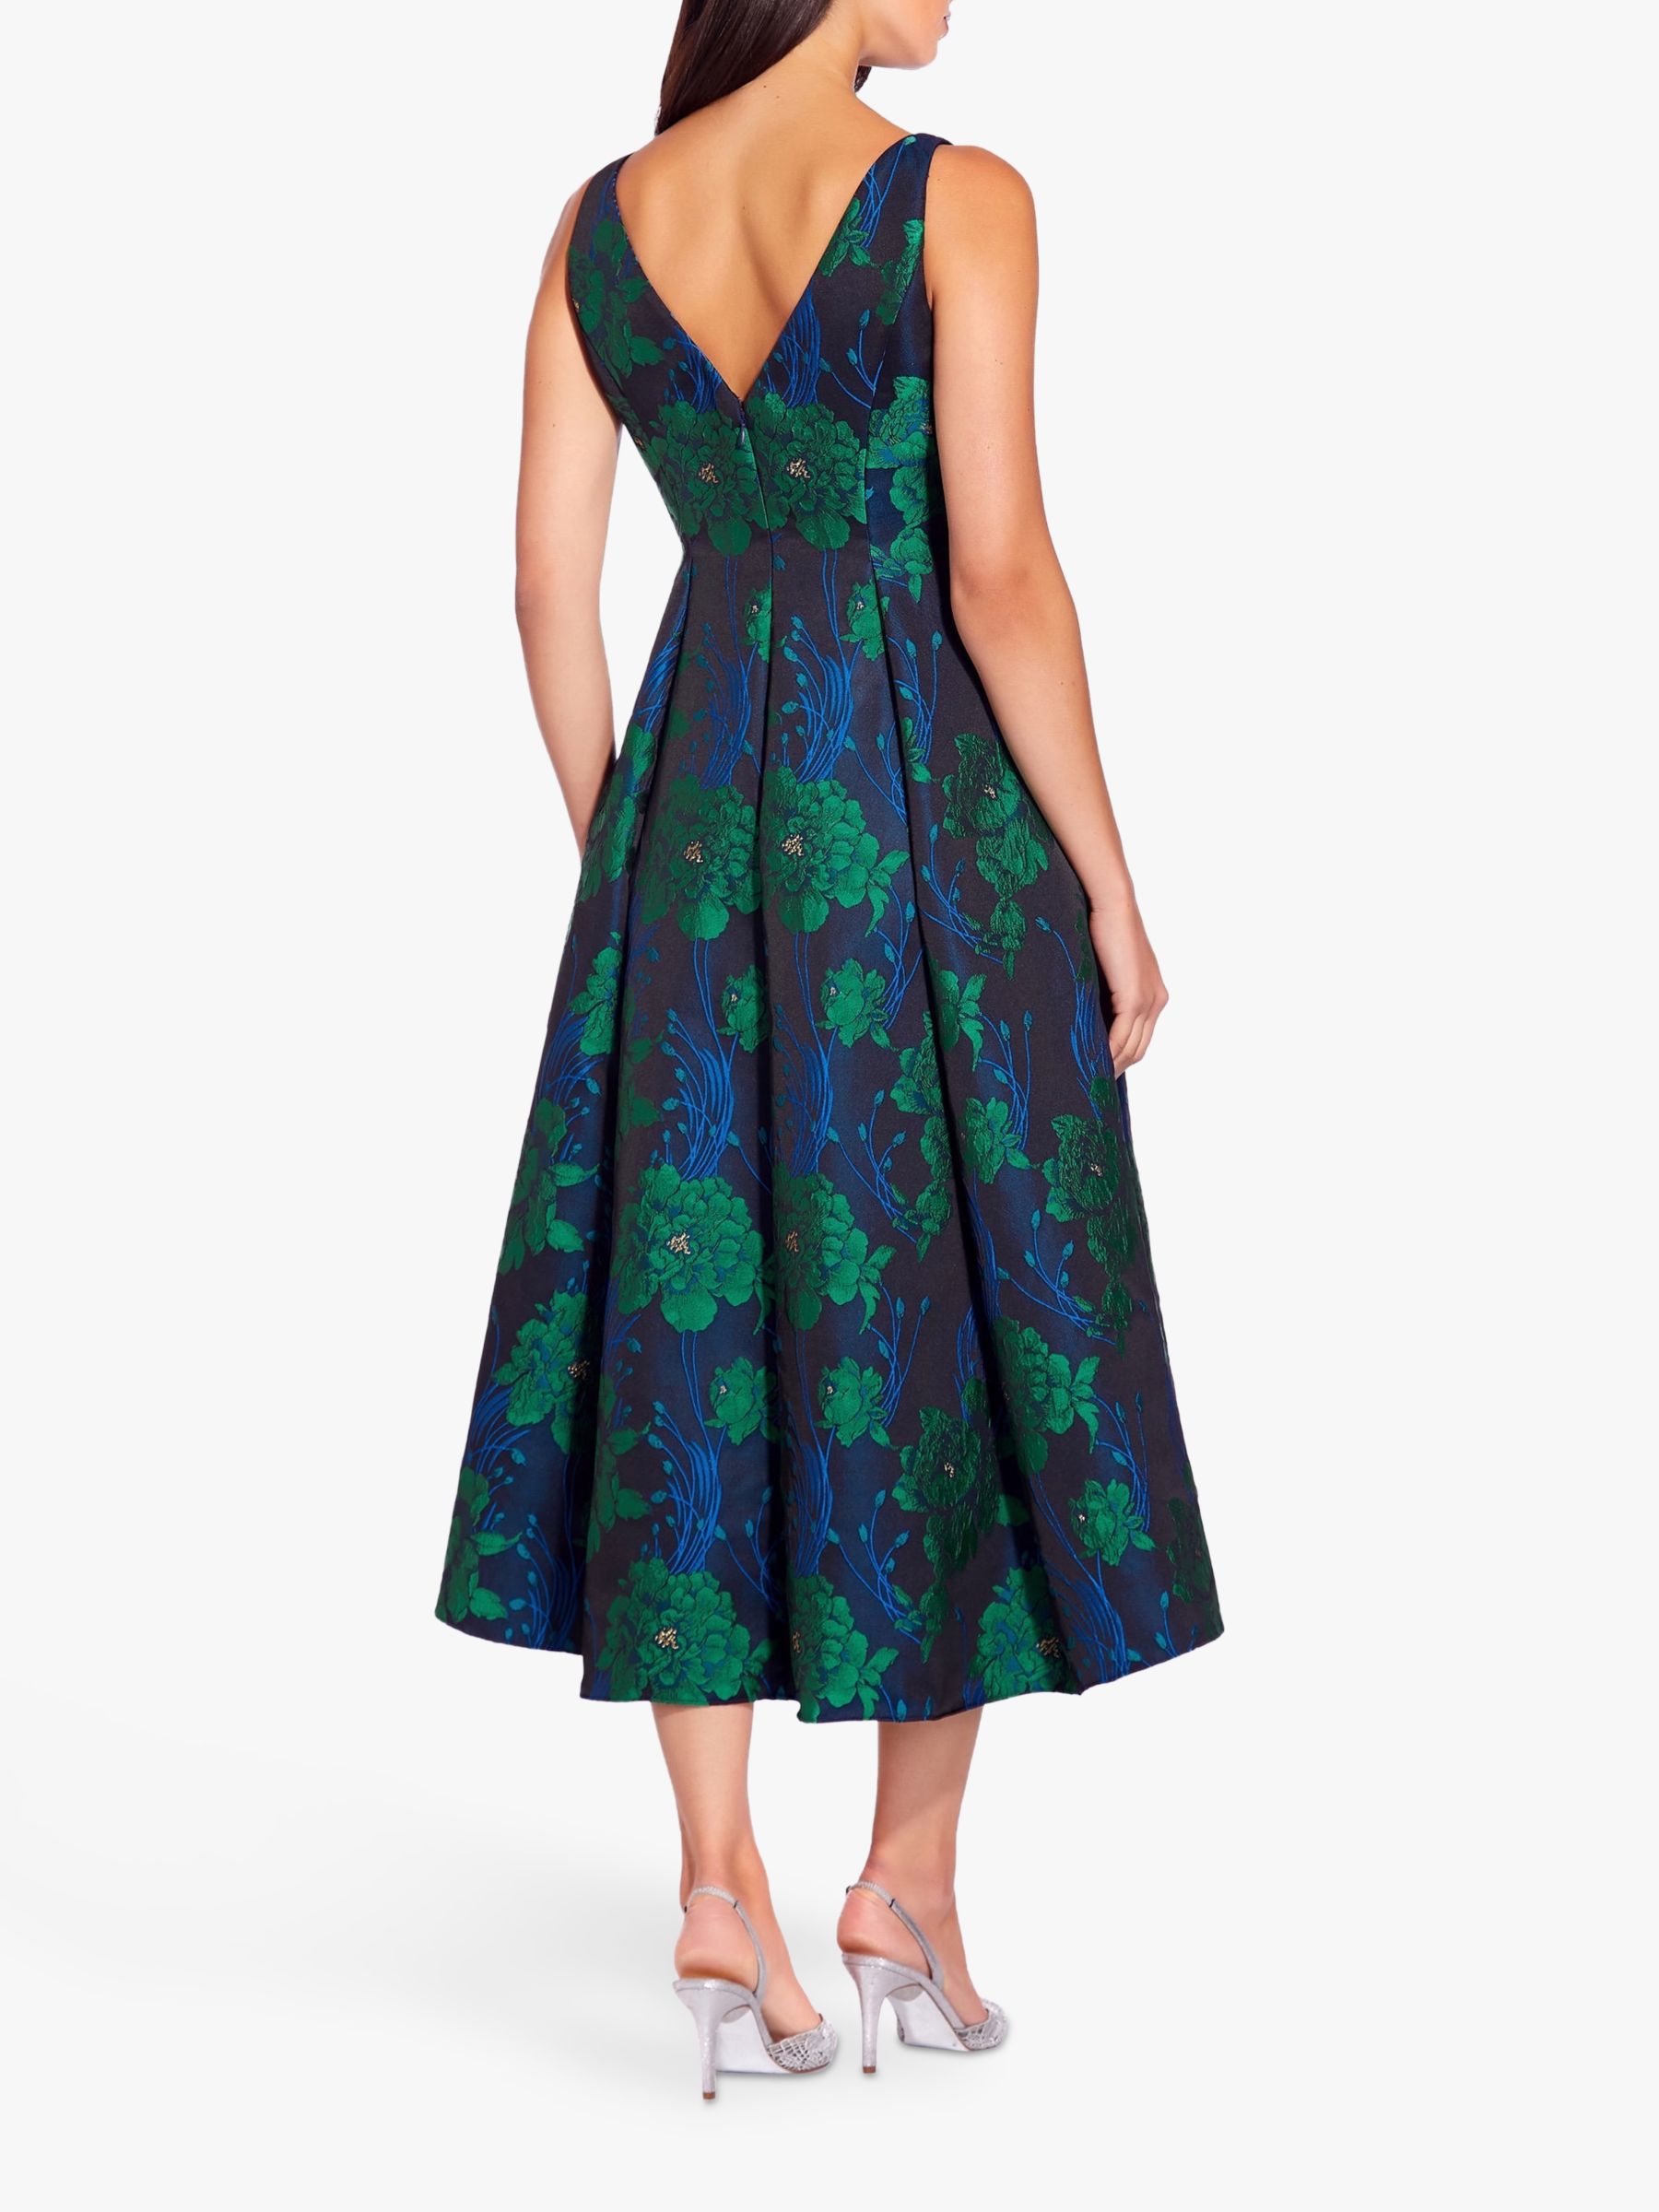 Adrianna Papell Charmed Floral Dress, Green/Multi